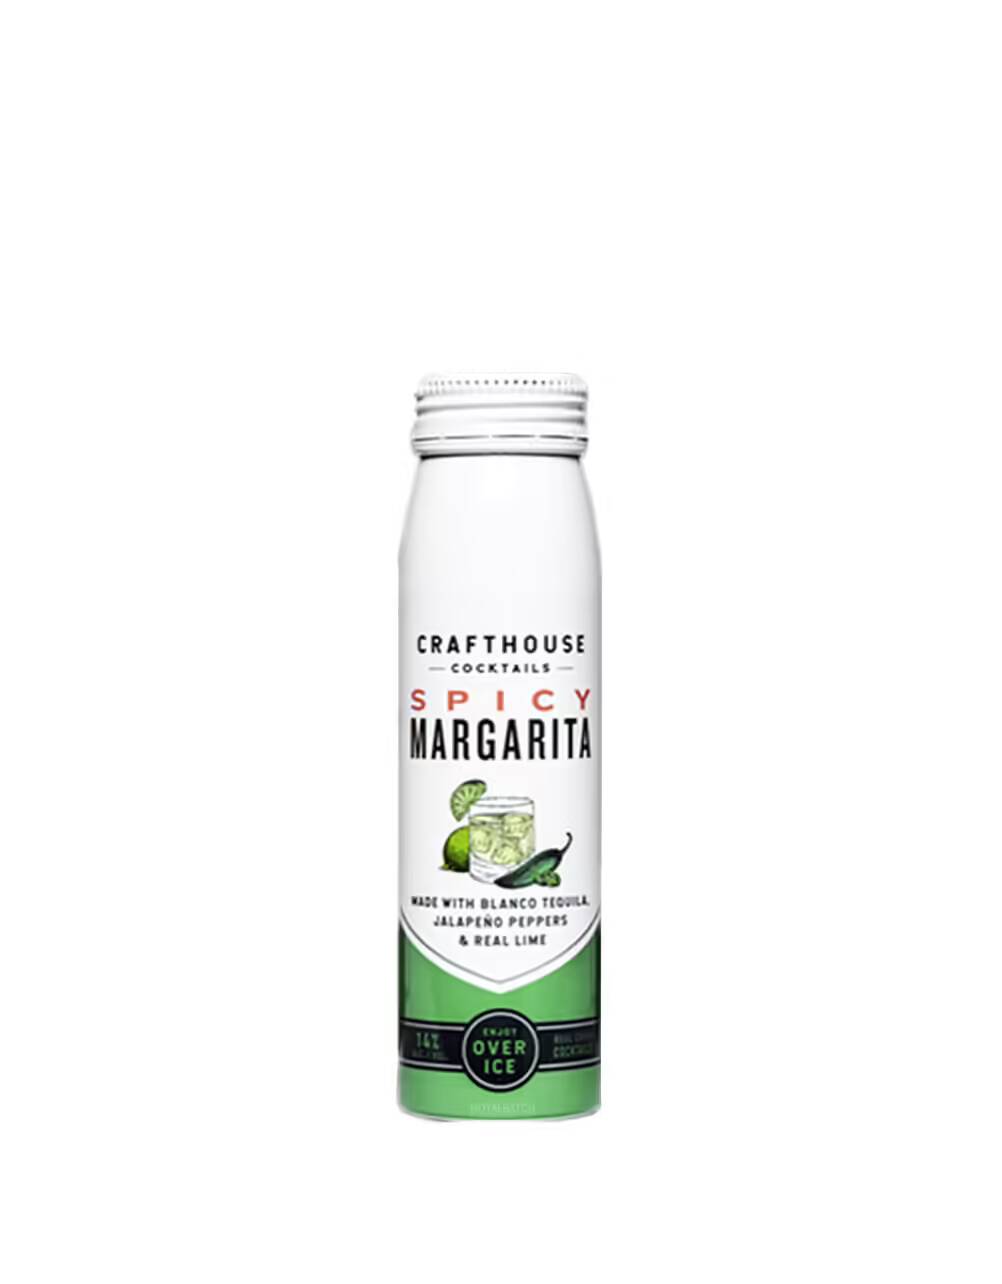 Crafthouse Cocktails Spicy Margarita 200 ml